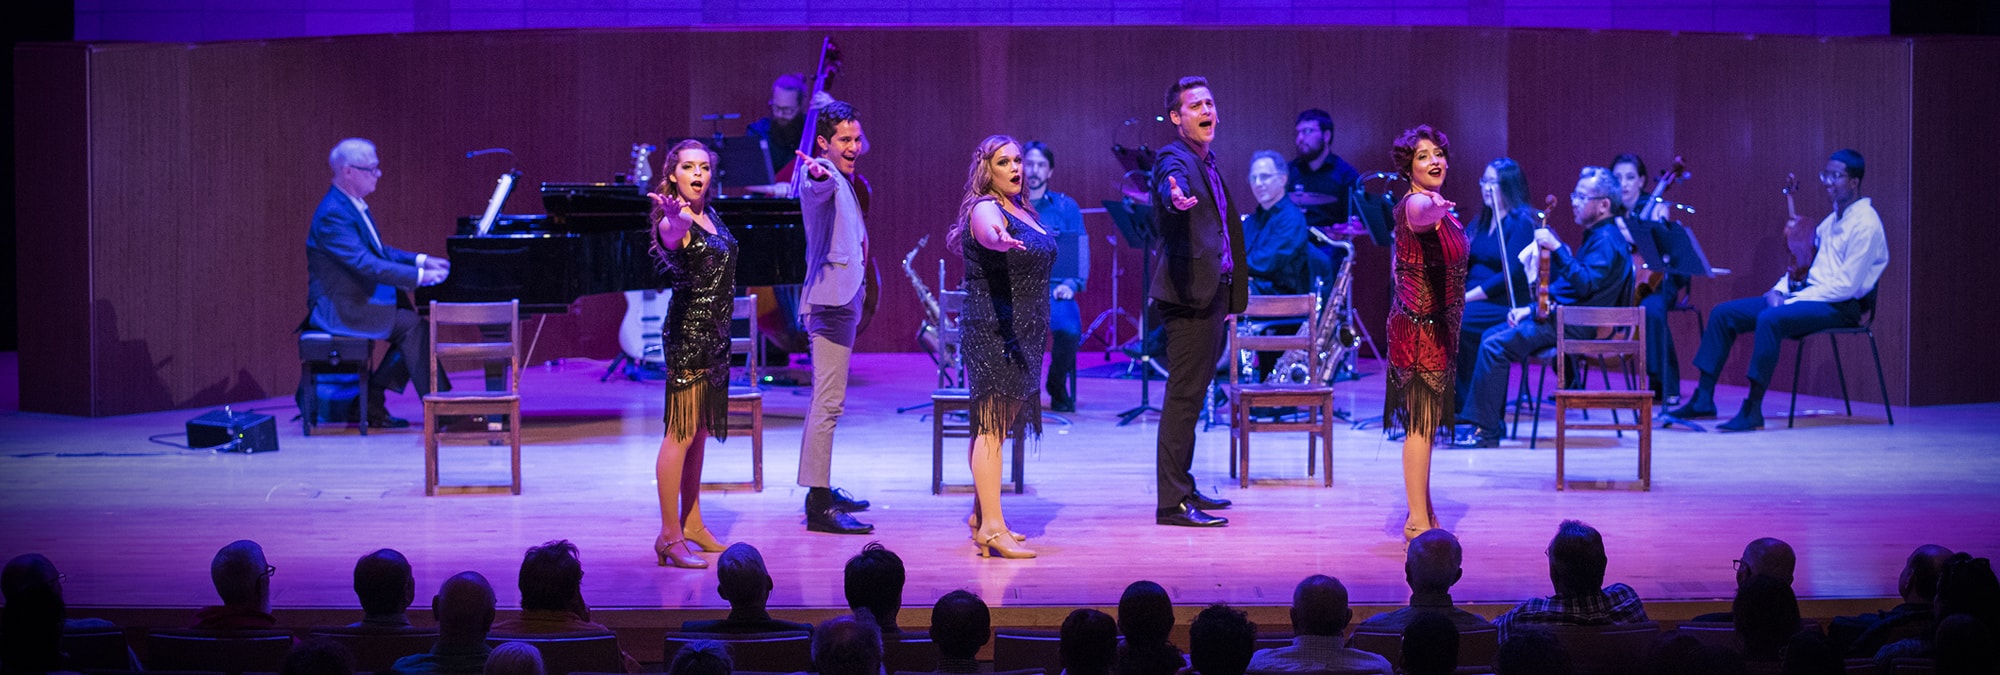 Musical theater performance with Michael Horsley, Katherine Ahmann, Radames Gil, McKaylee Todd, Edward Laurenson, Sarah Nadreau, and band in Caroline H. Hume Concert Hall